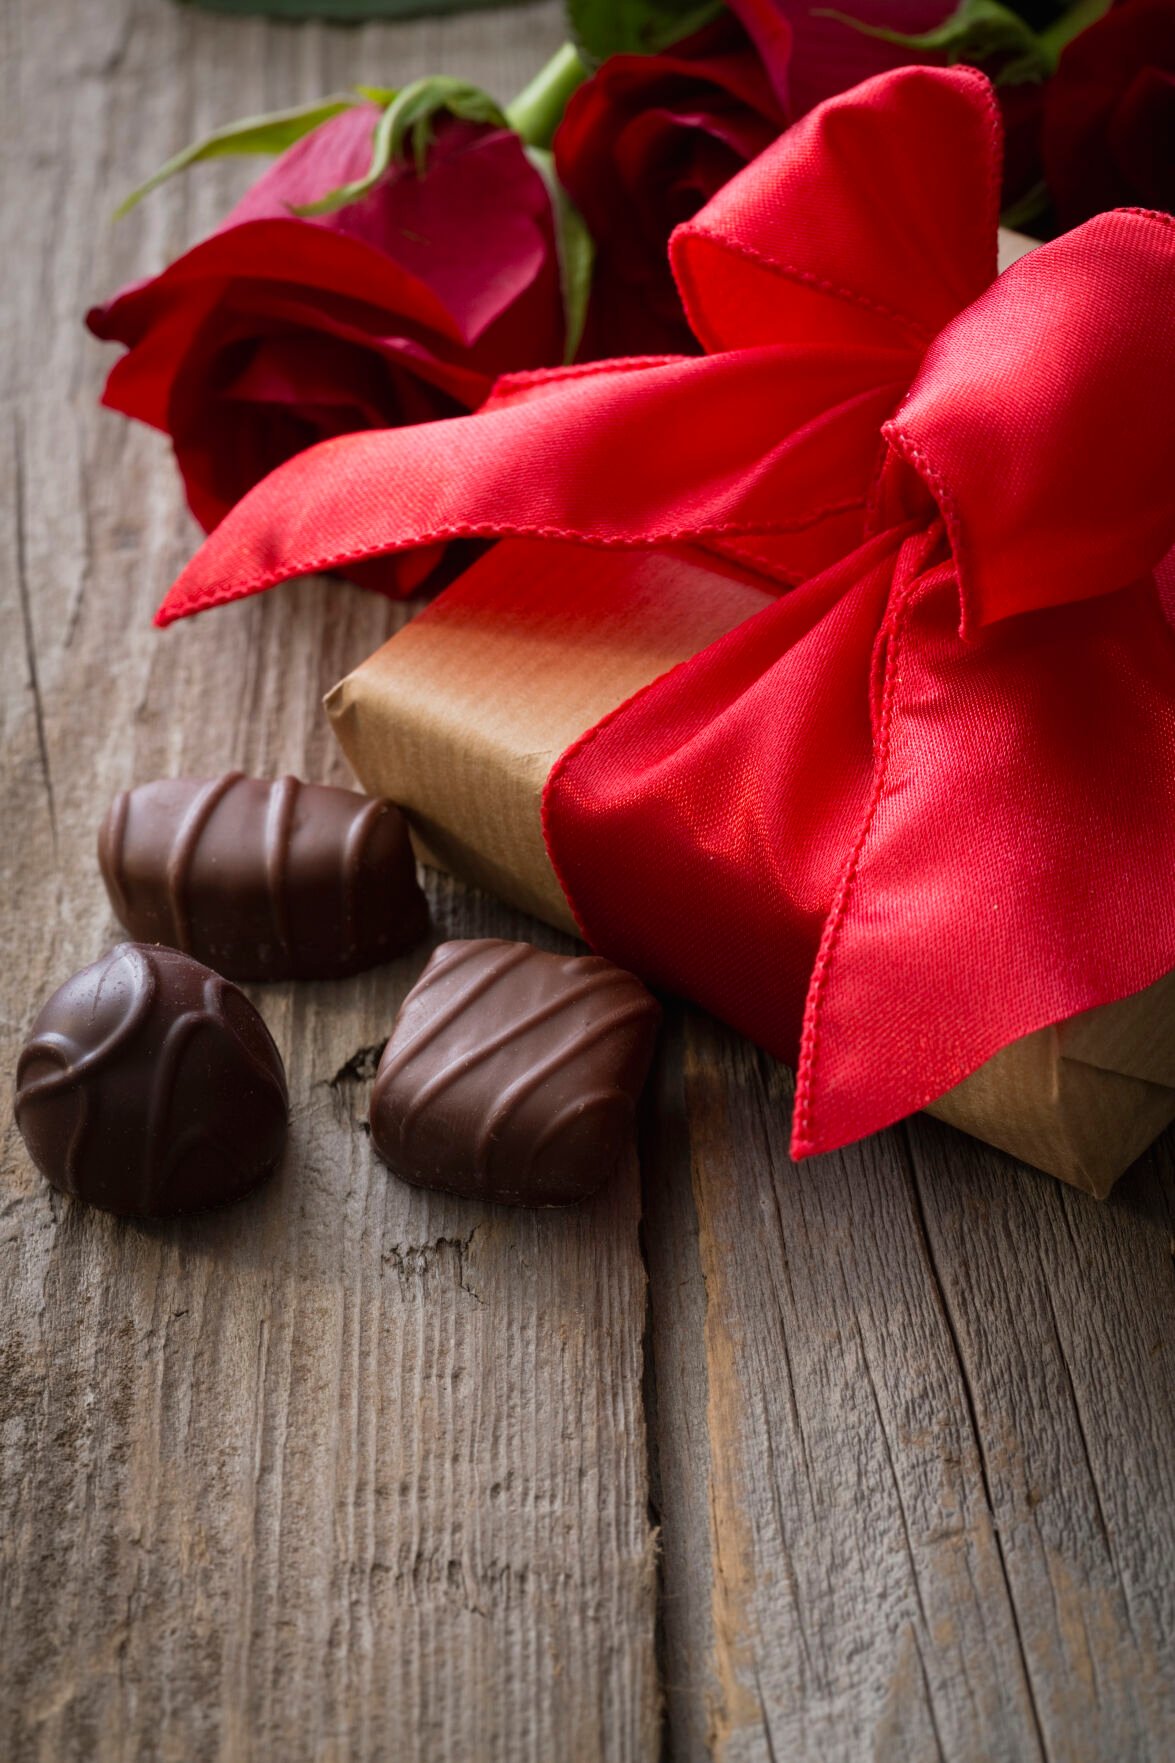 “Valentine’s Day Chocolates: A Healthy Choice for Health and Fitness?” | Feature Article